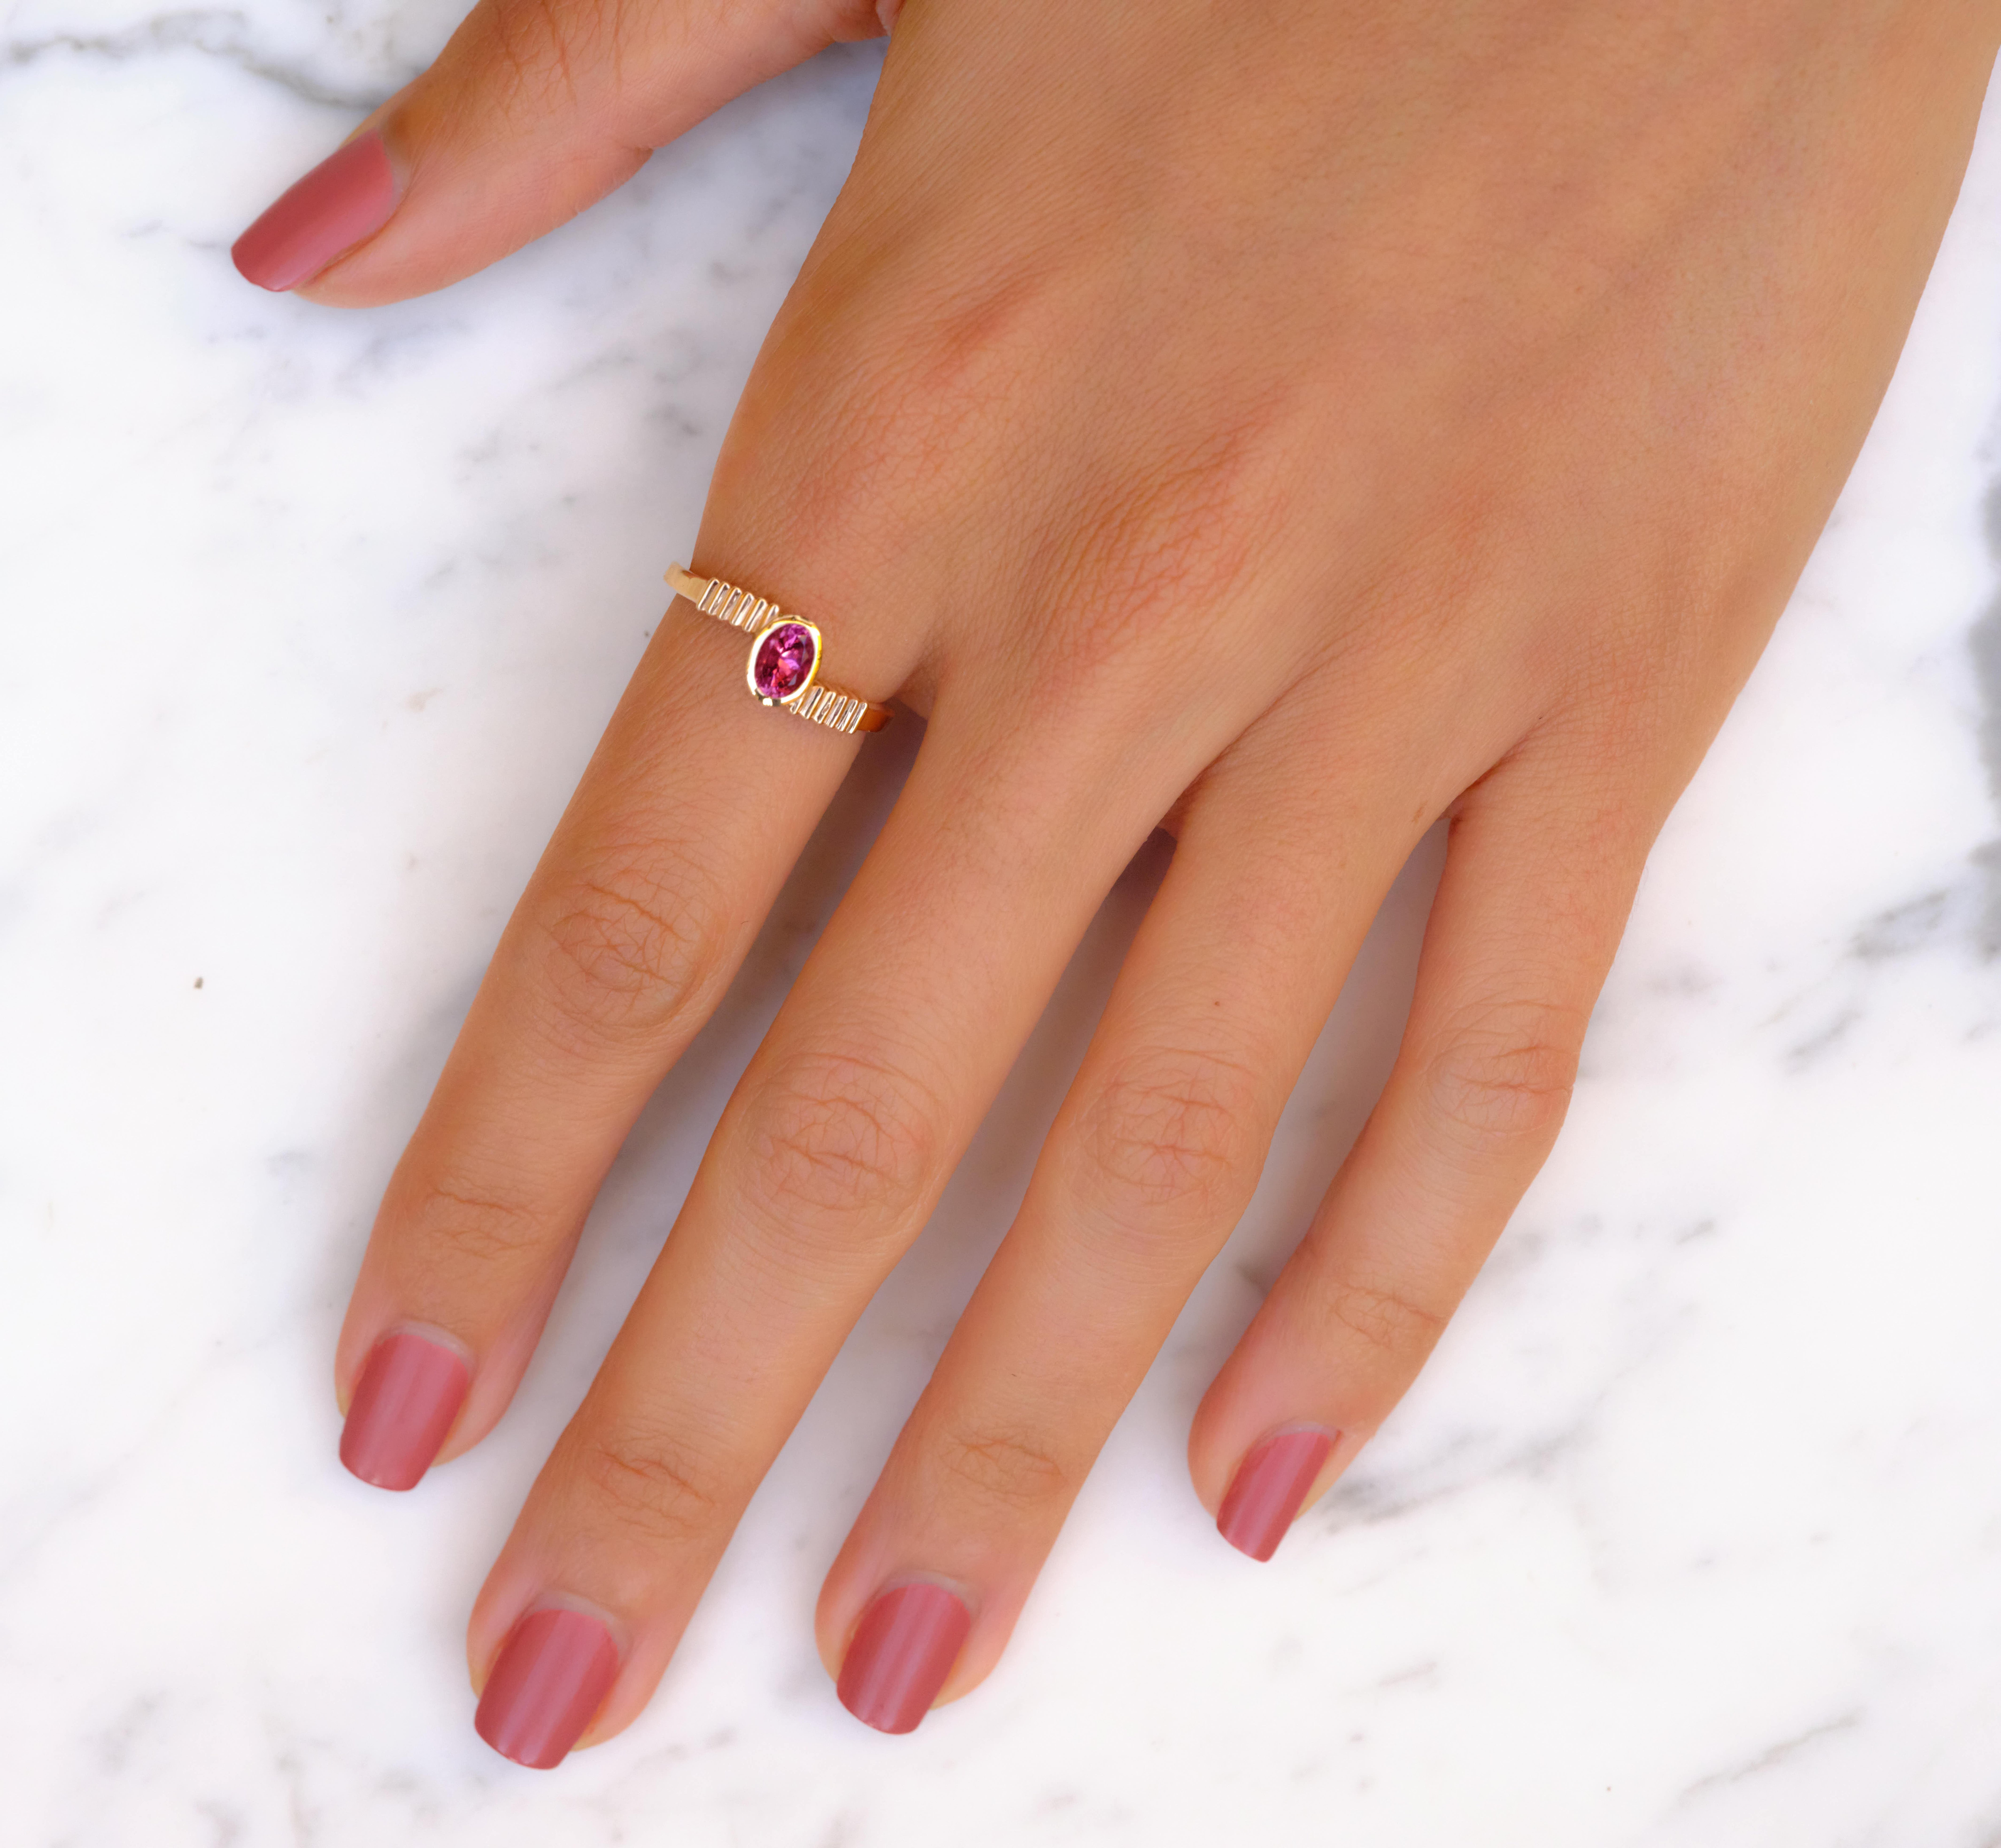 When simplicity meets the extraordinary. Mix & Match

Available rose gold in size 53 (EU) 6,6 (US), 16,8 mm
The size can be altered to fit

•	18 Karat Recycled Rose Gold 
•	Pink sapphire 6×5 mm oval cut
•	0,50 ct
•	Weight: approx. 4 gr